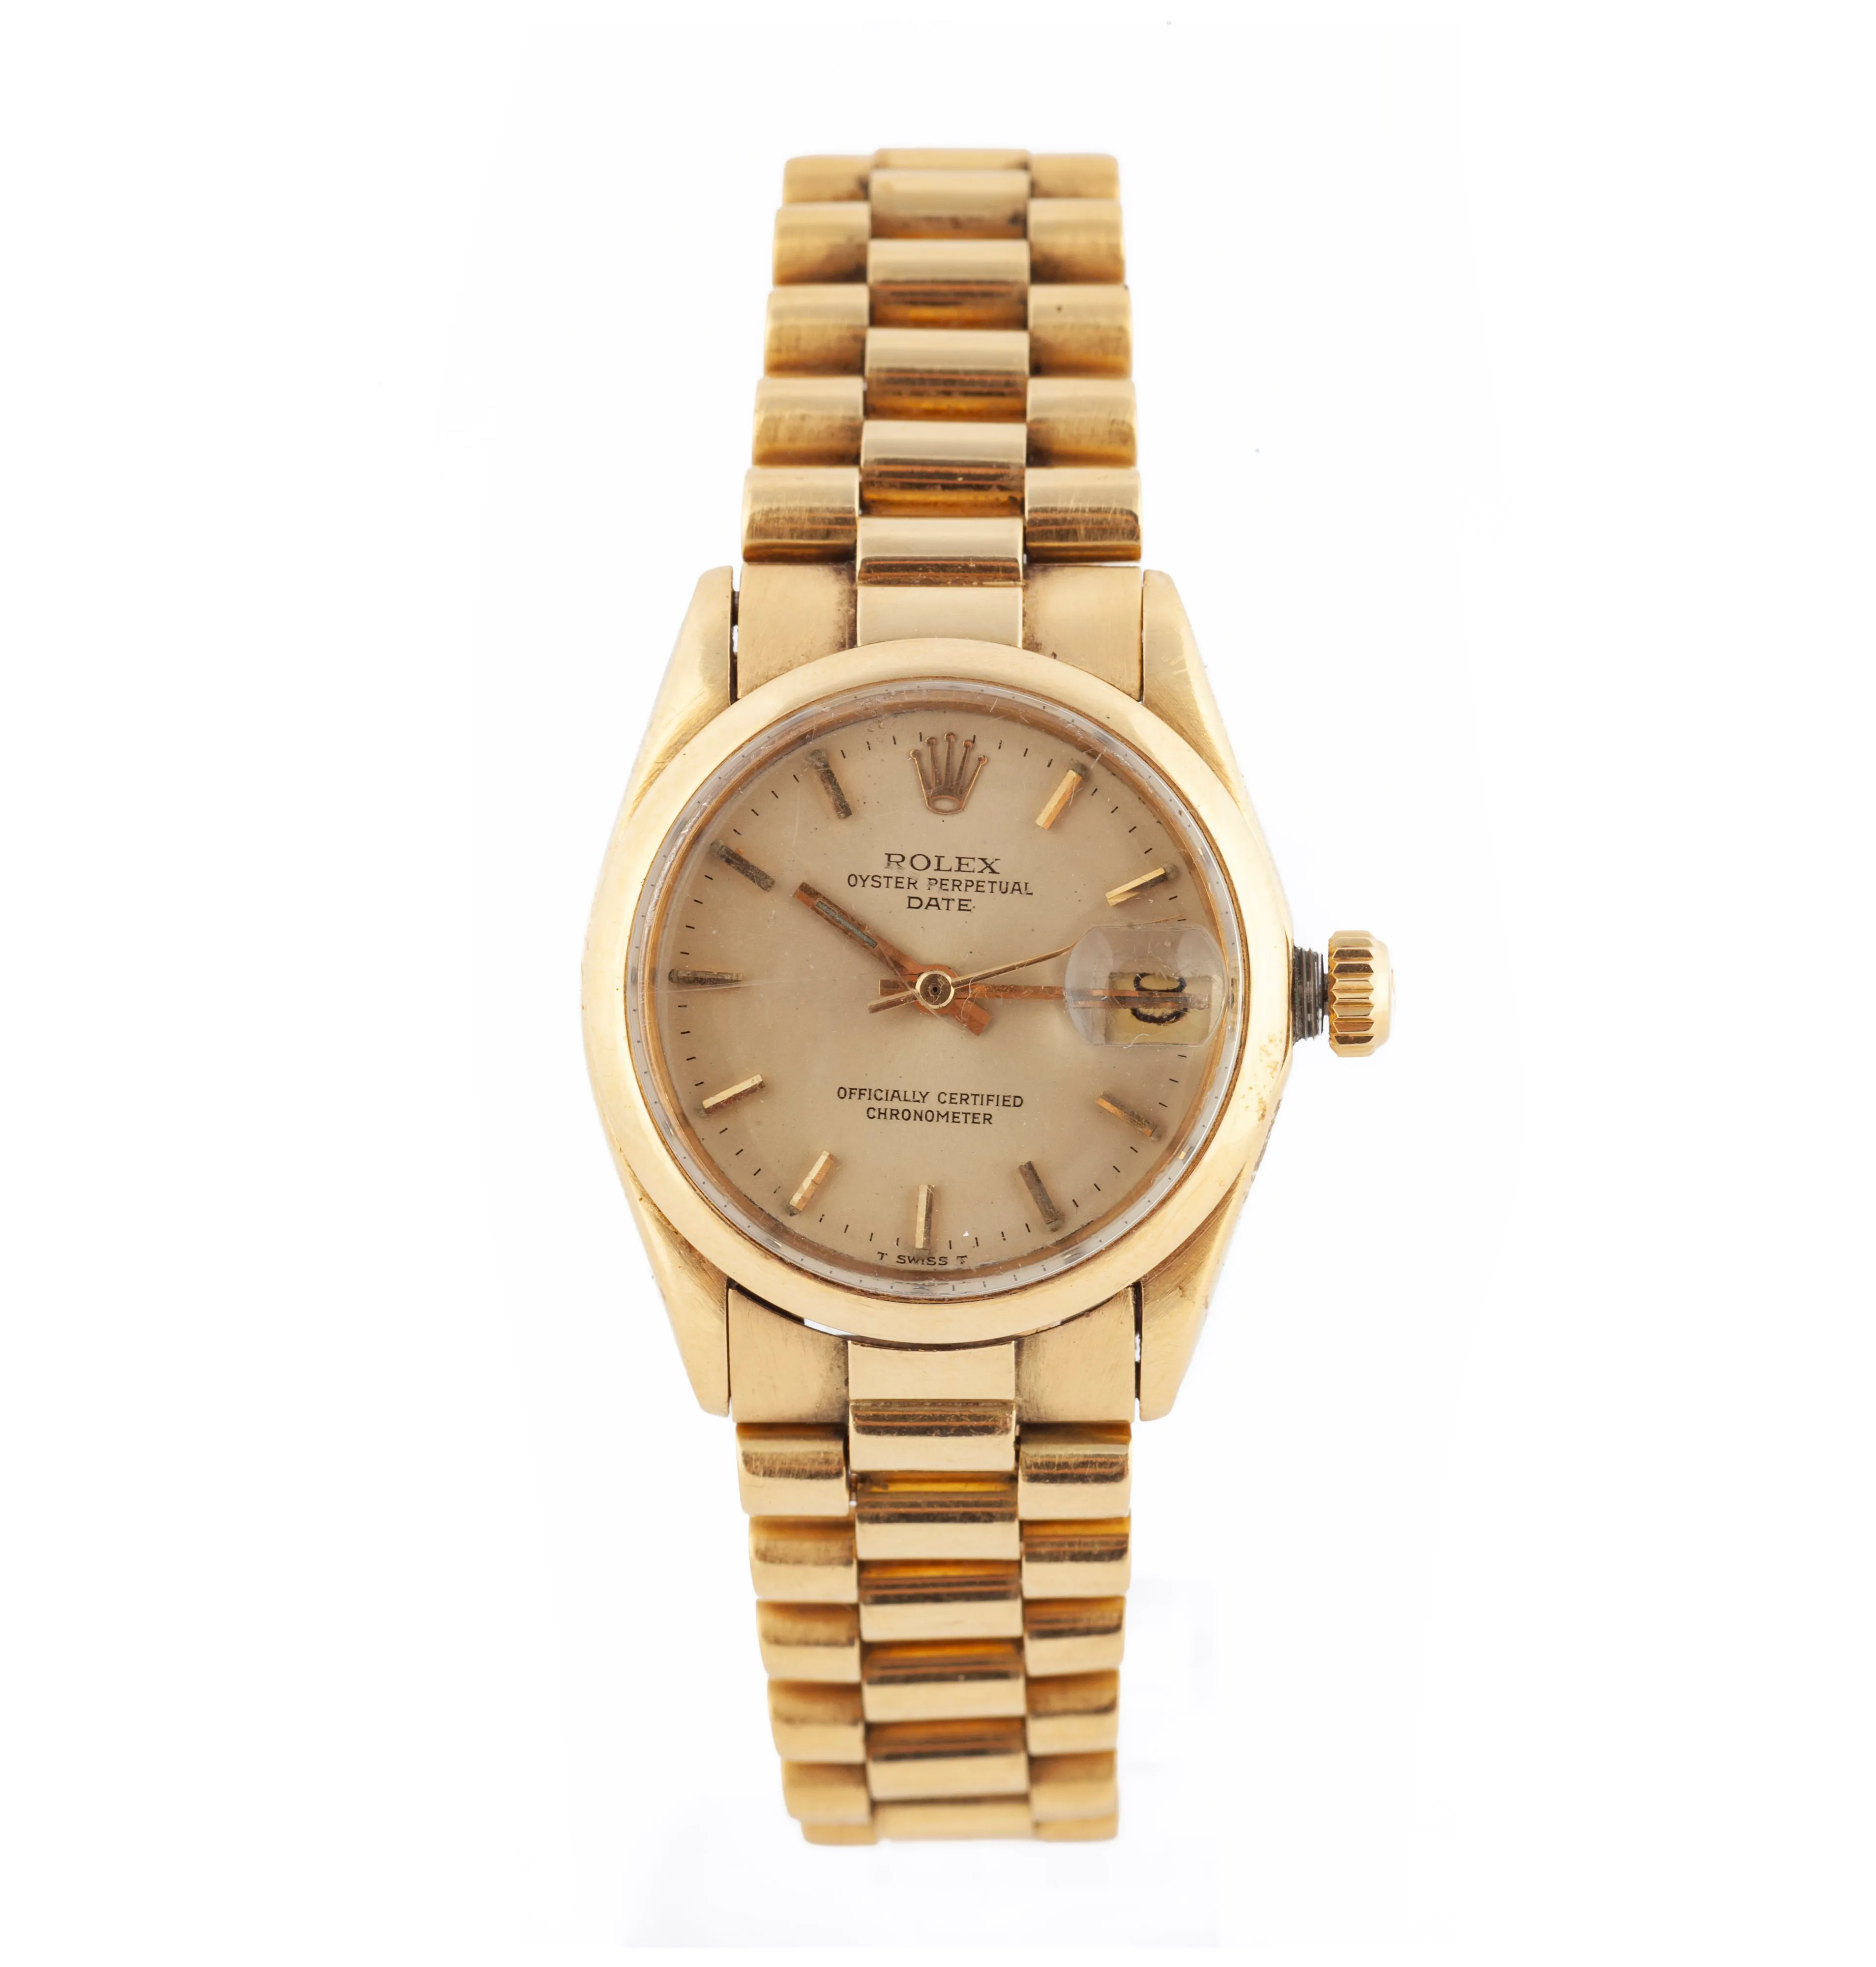 Rolex Oyster Perpetual Date 6624 30mm Yellow gold Champagne